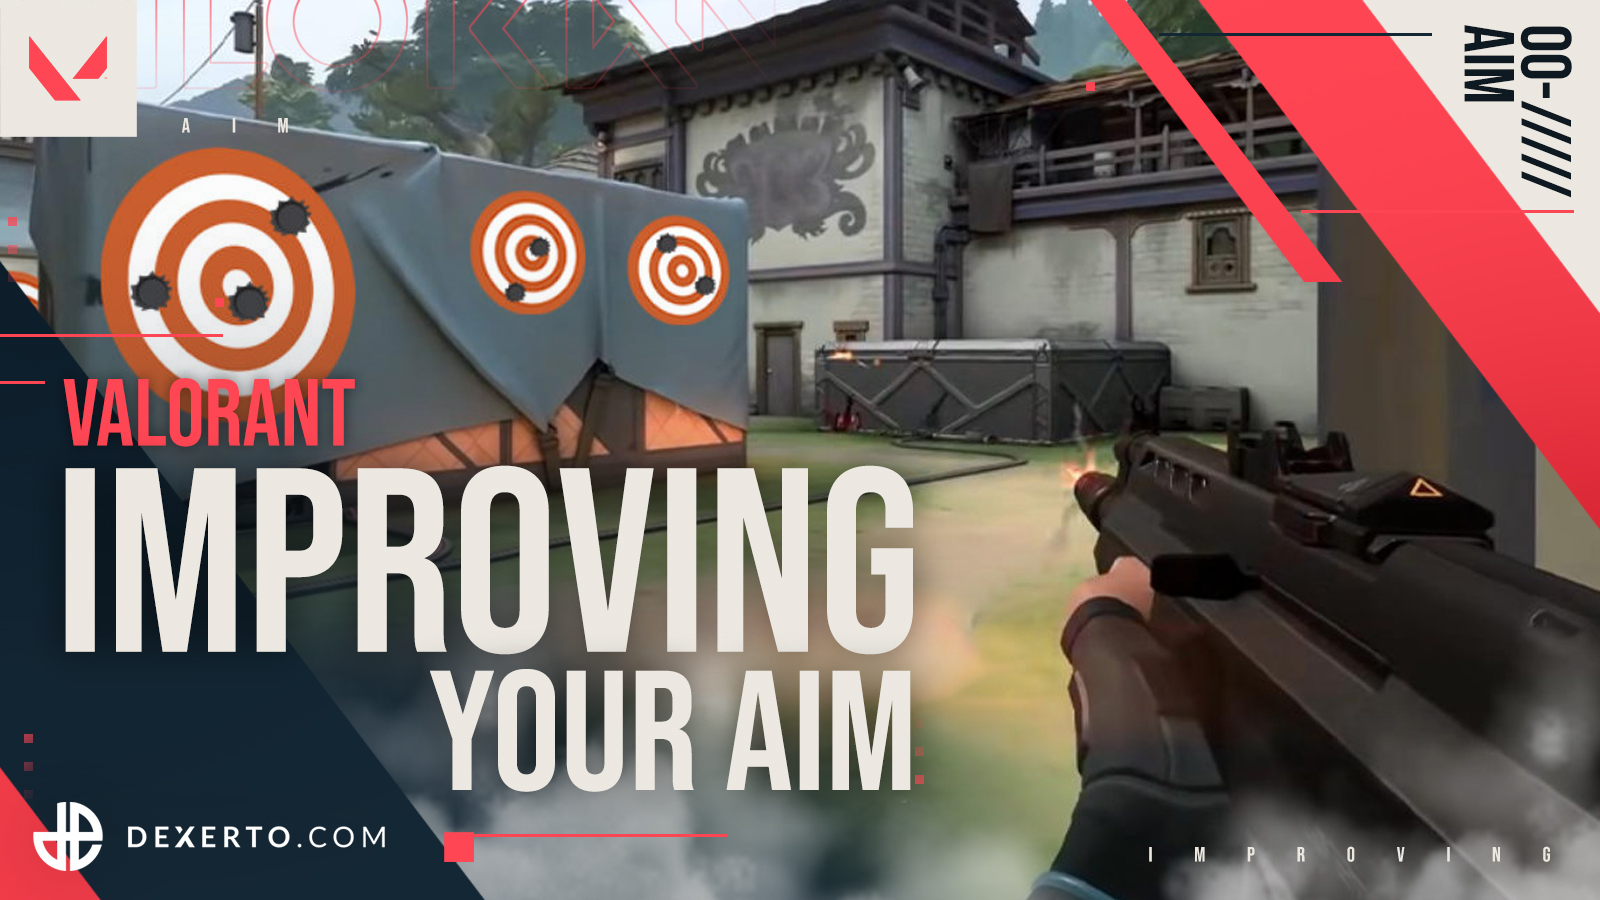 Valorant: how to improve your aim, training, accuracy, recoil